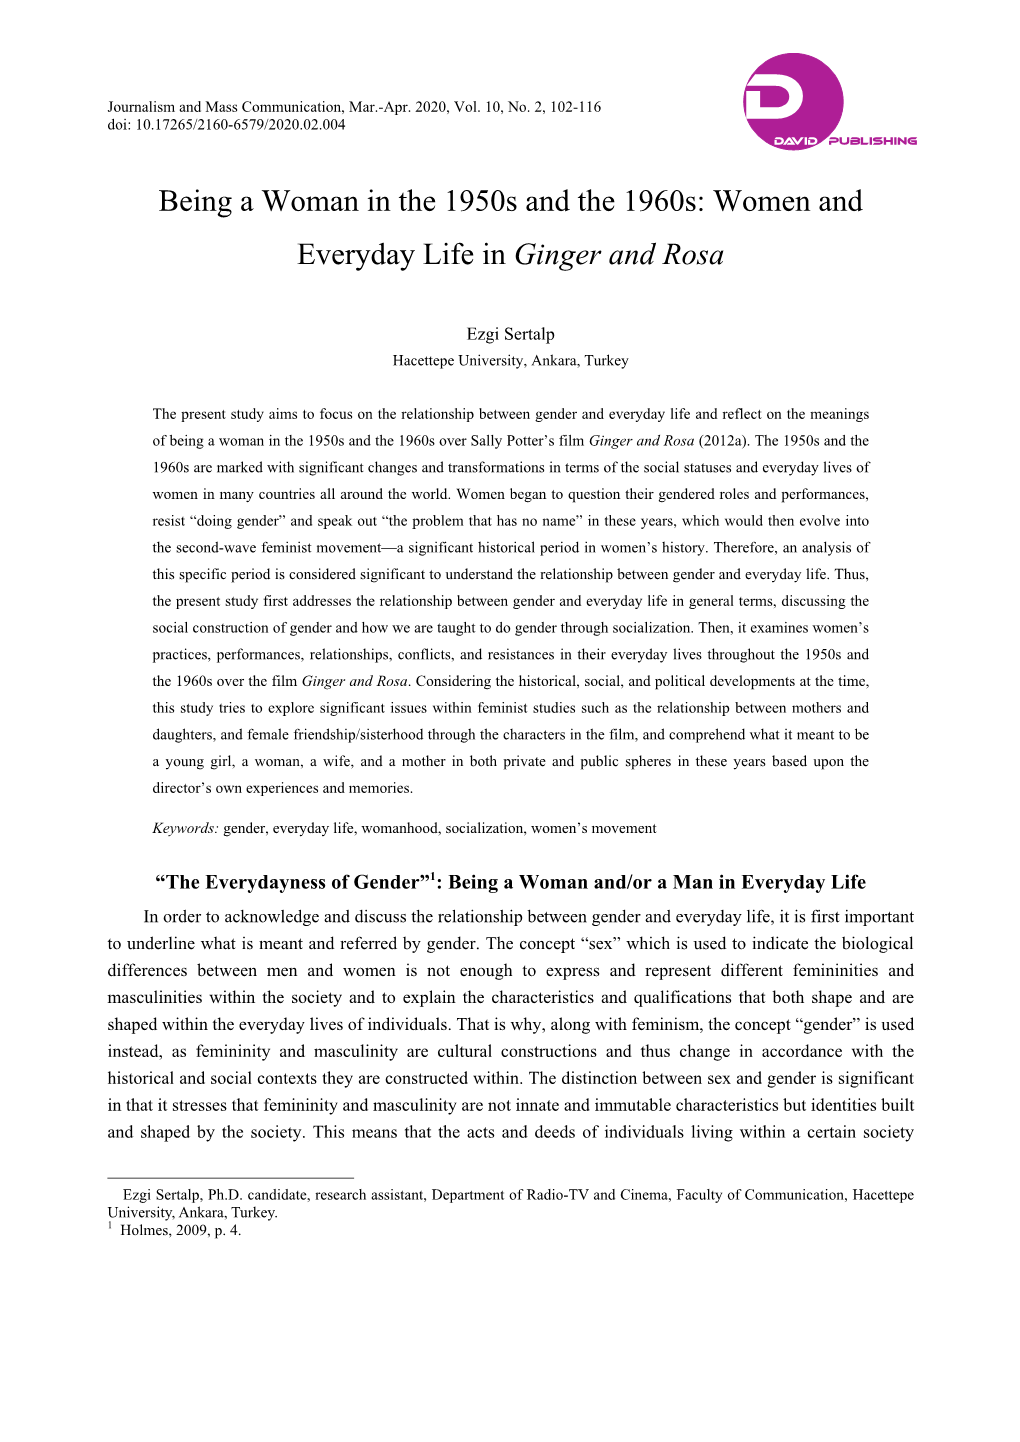 Being a Woman in the 1950S and the 1960S: Women and Everyday Life in Ginger and Rosa